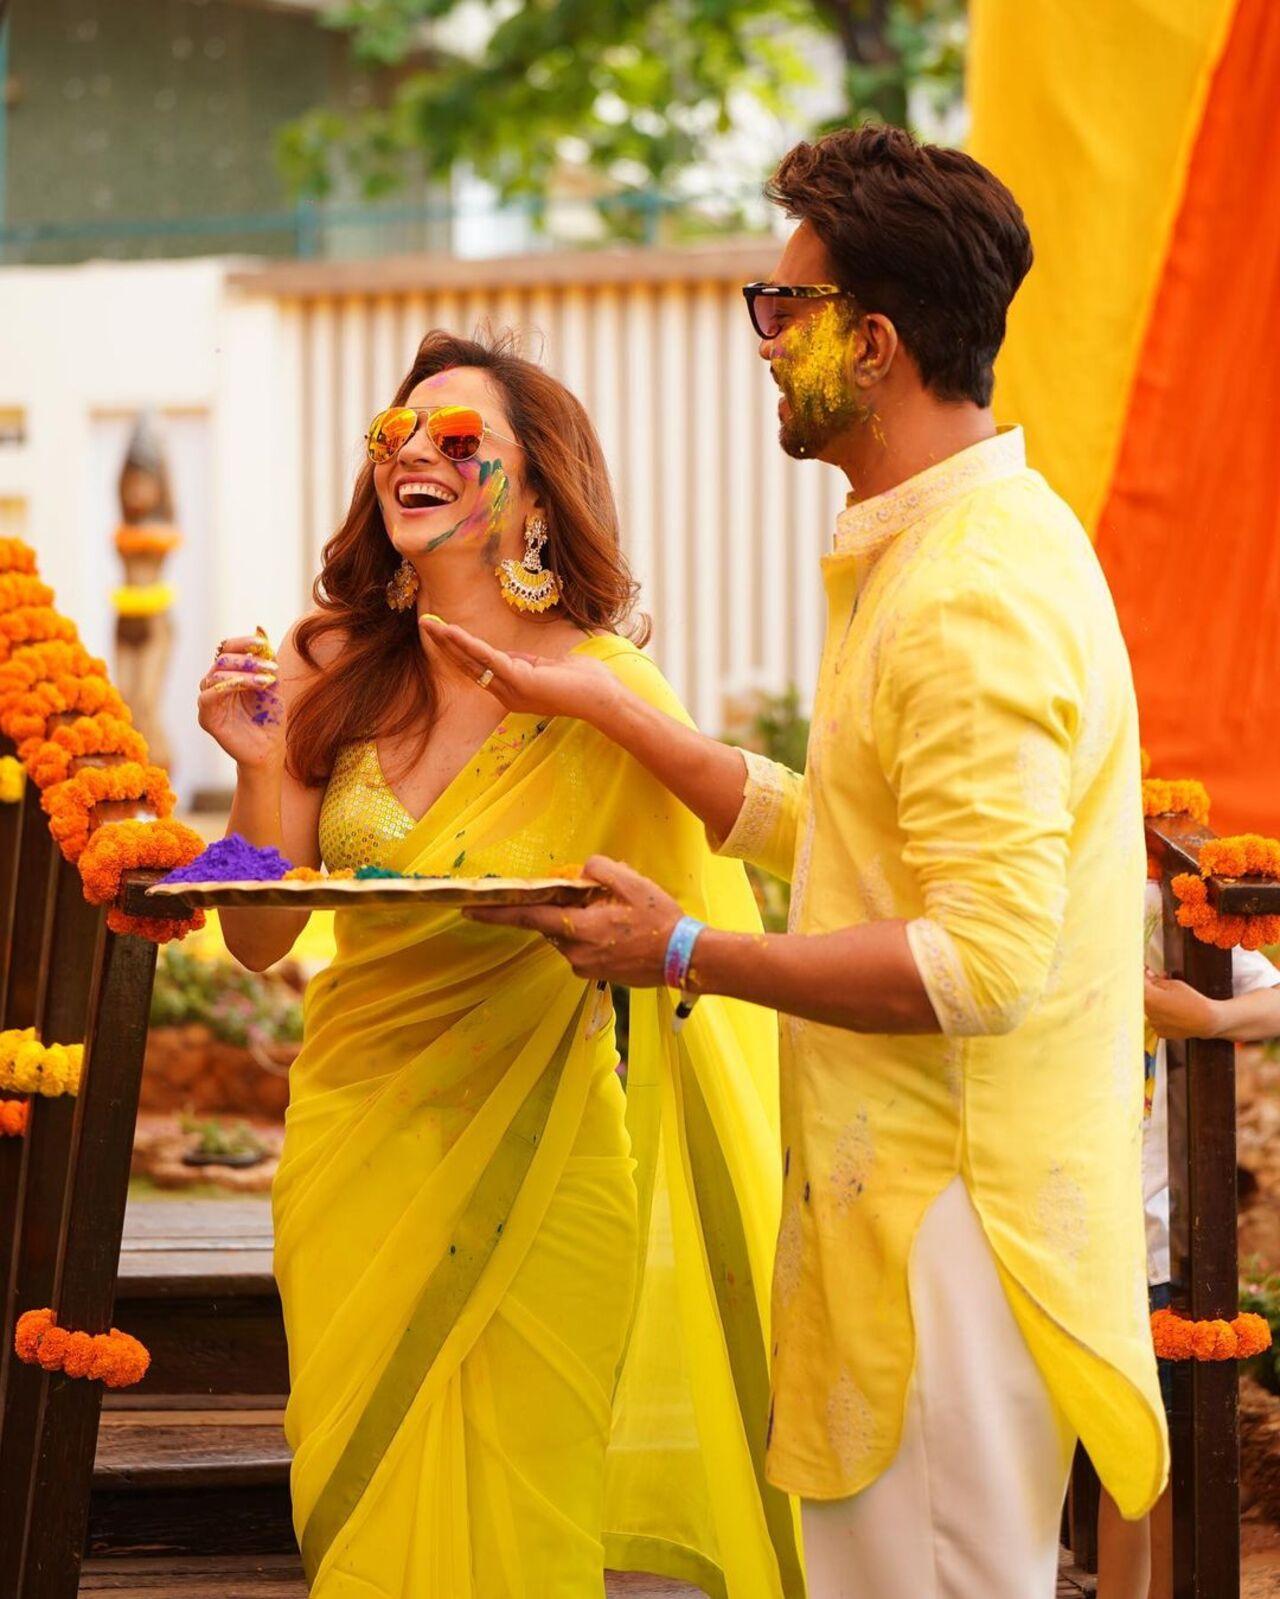 In the festival of colours, Holi, the air was filled with laughter and love as the lovely couple, Ankita Lokhande and Vicky Jain, embraced the spirit of togetherness